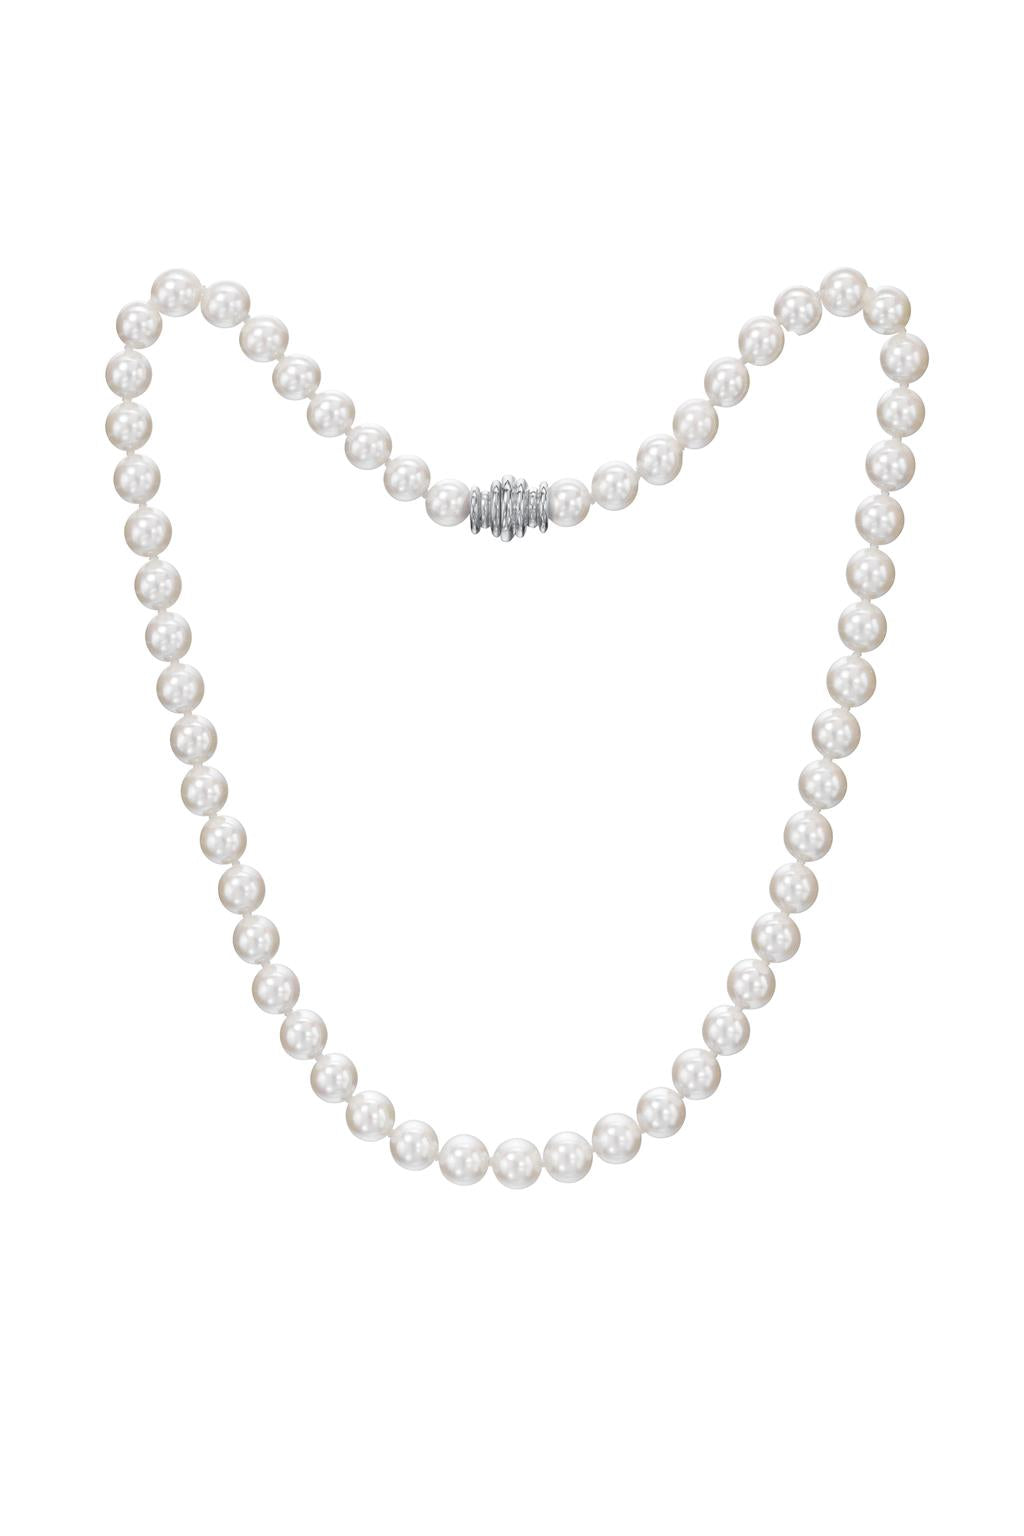 Assael 7mm Akoya Pearl Necklace